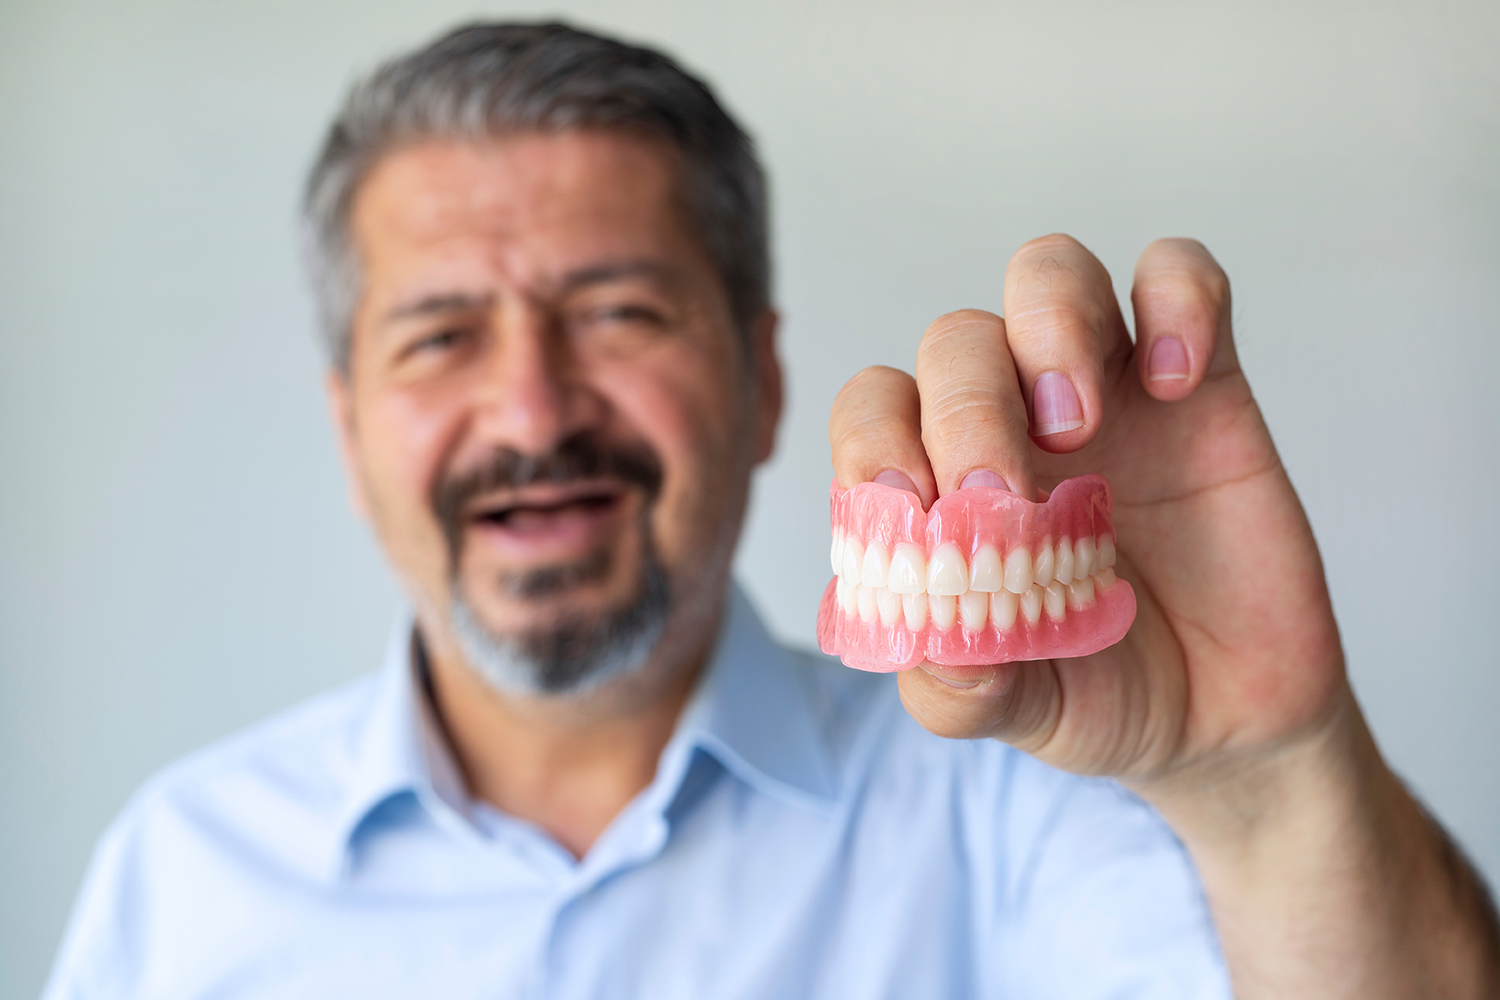 guy holding dentures smiling showing his awesome dentures